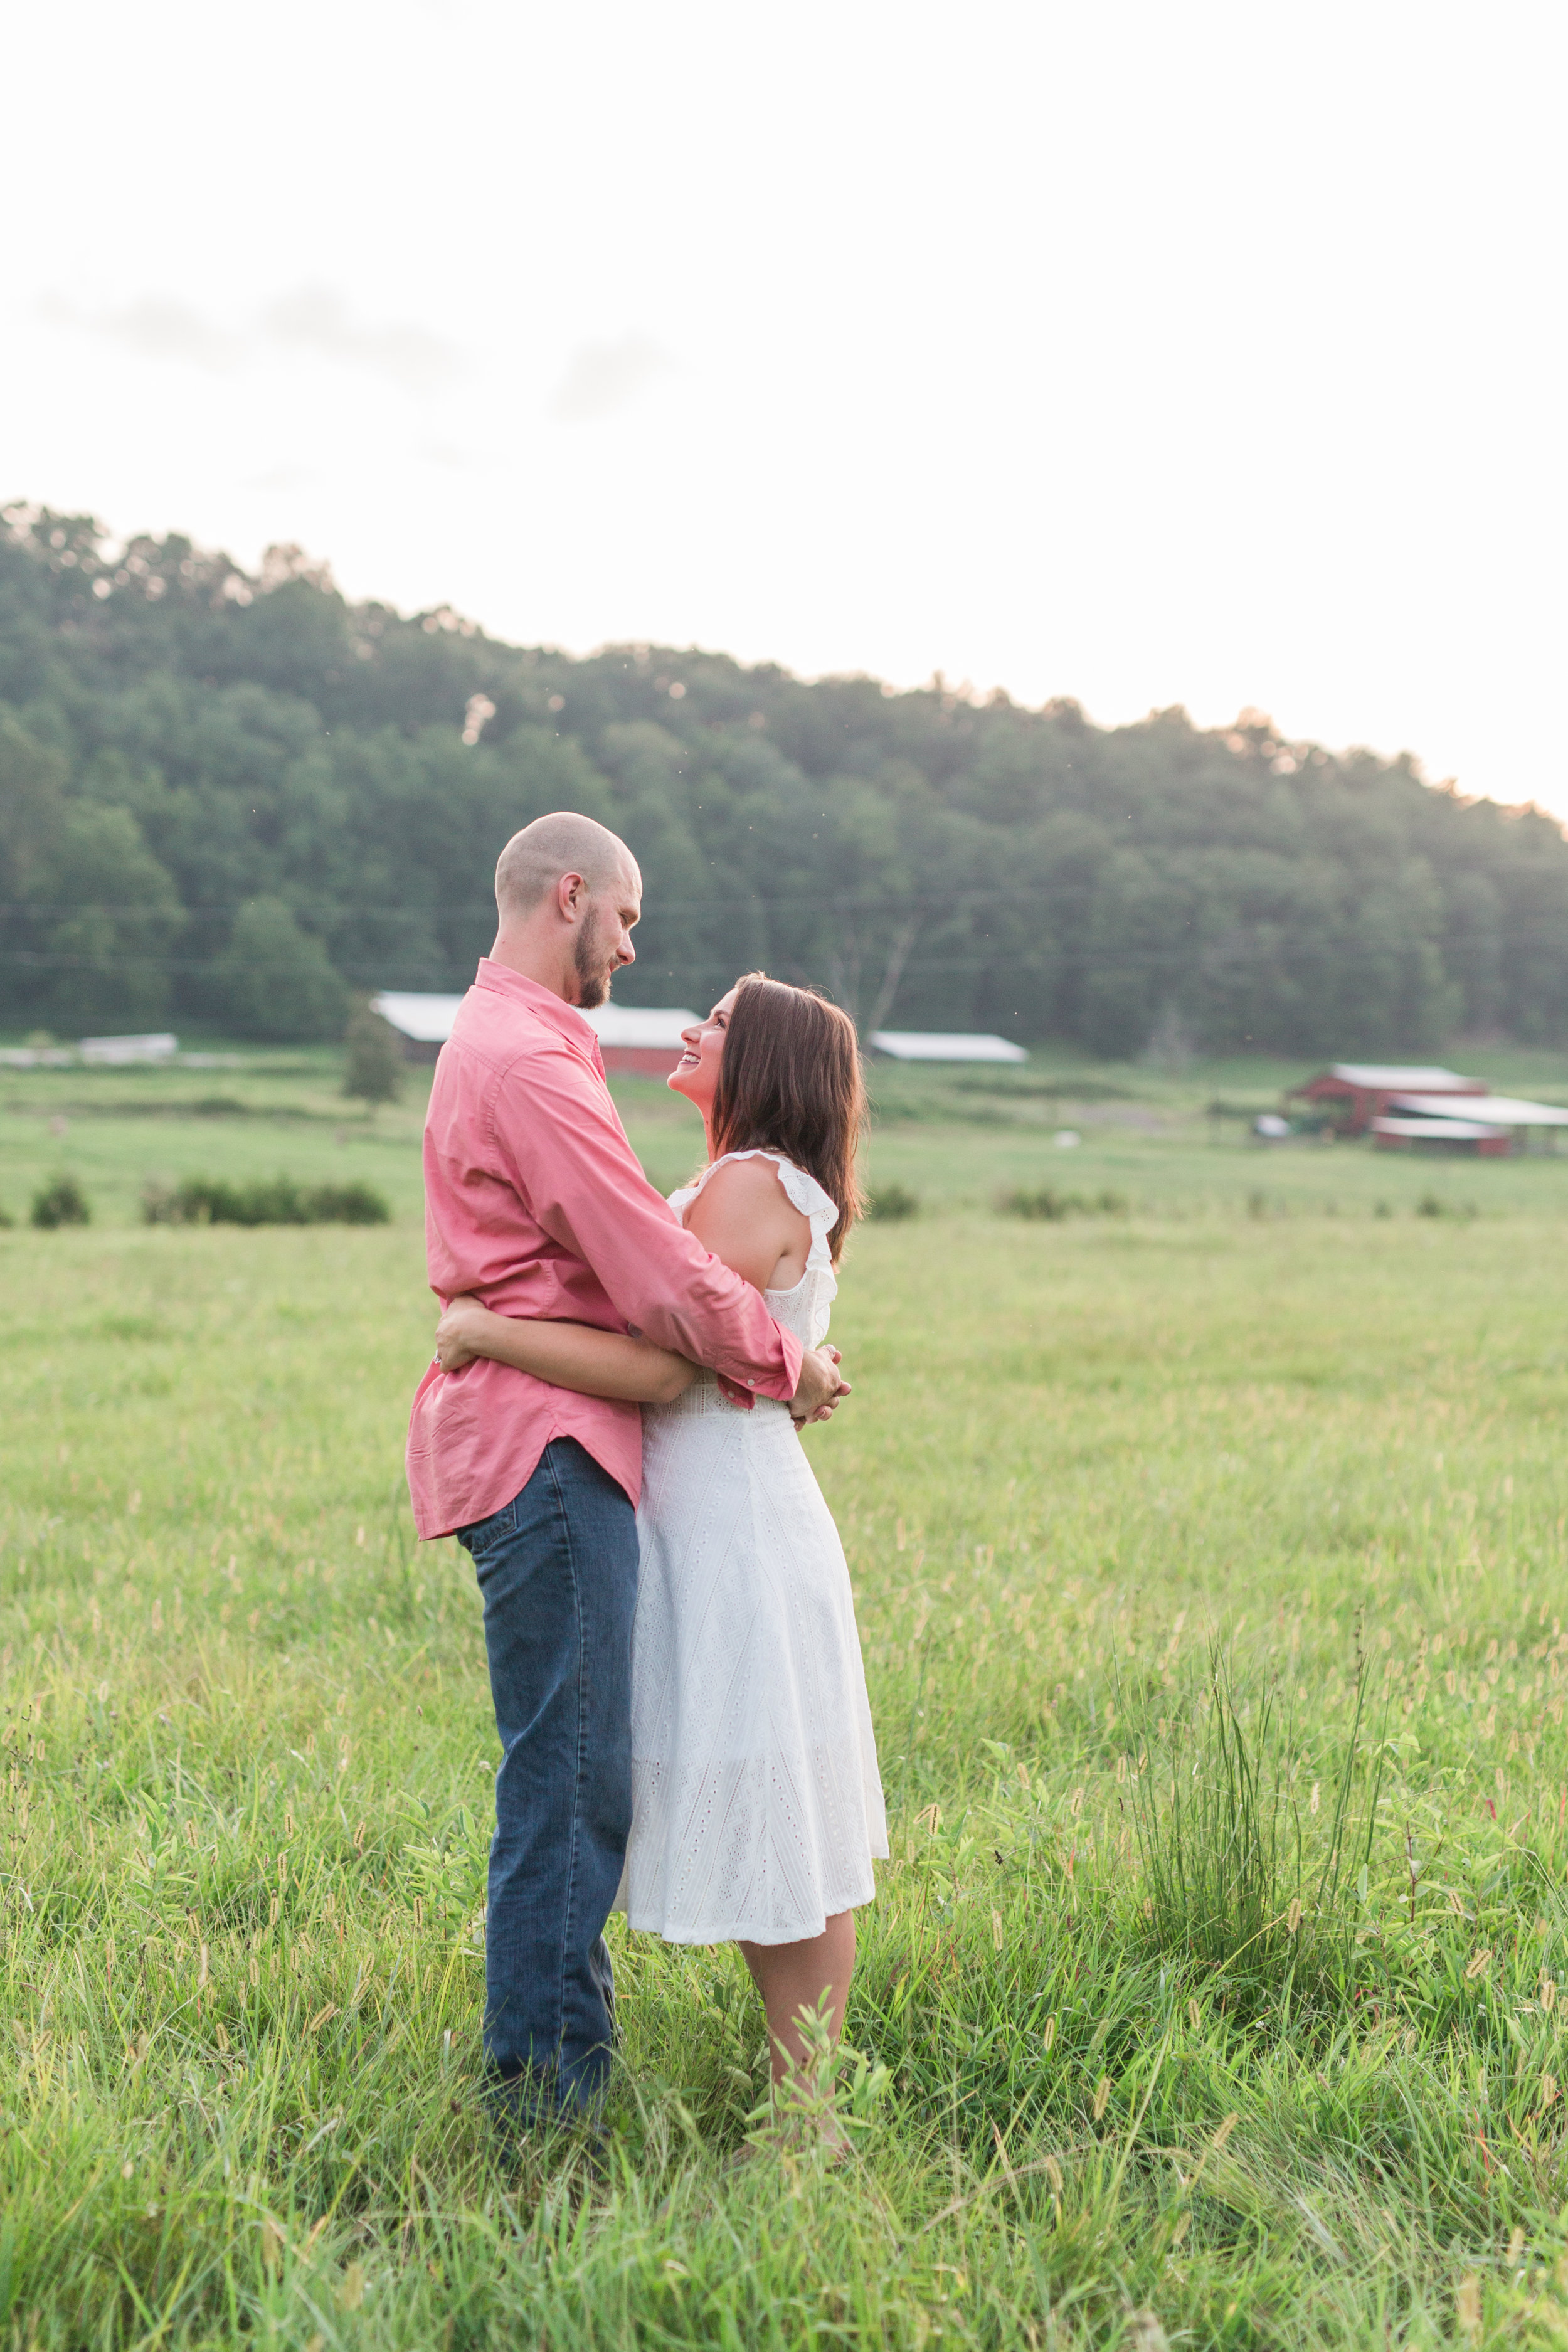 Eagle Rock Engagement Session || Summer Engagement Session in Central Virginia || Virginia Wedding Photographer || Ashley Eiban Photography